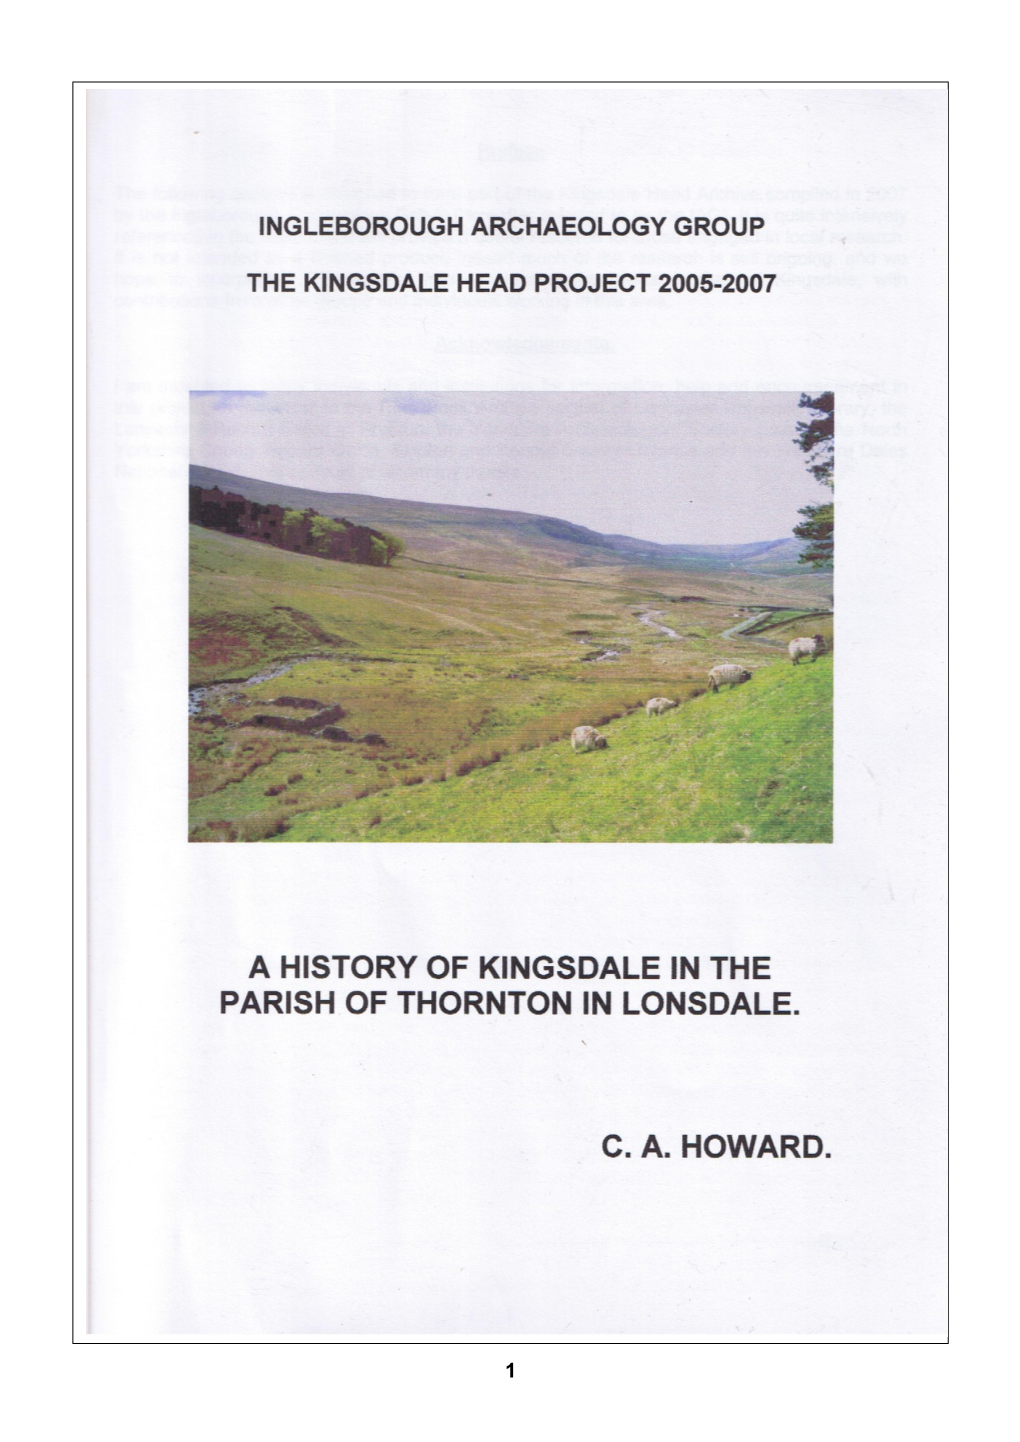 The History of the Broadwood Site in Thornton in Lonsdale